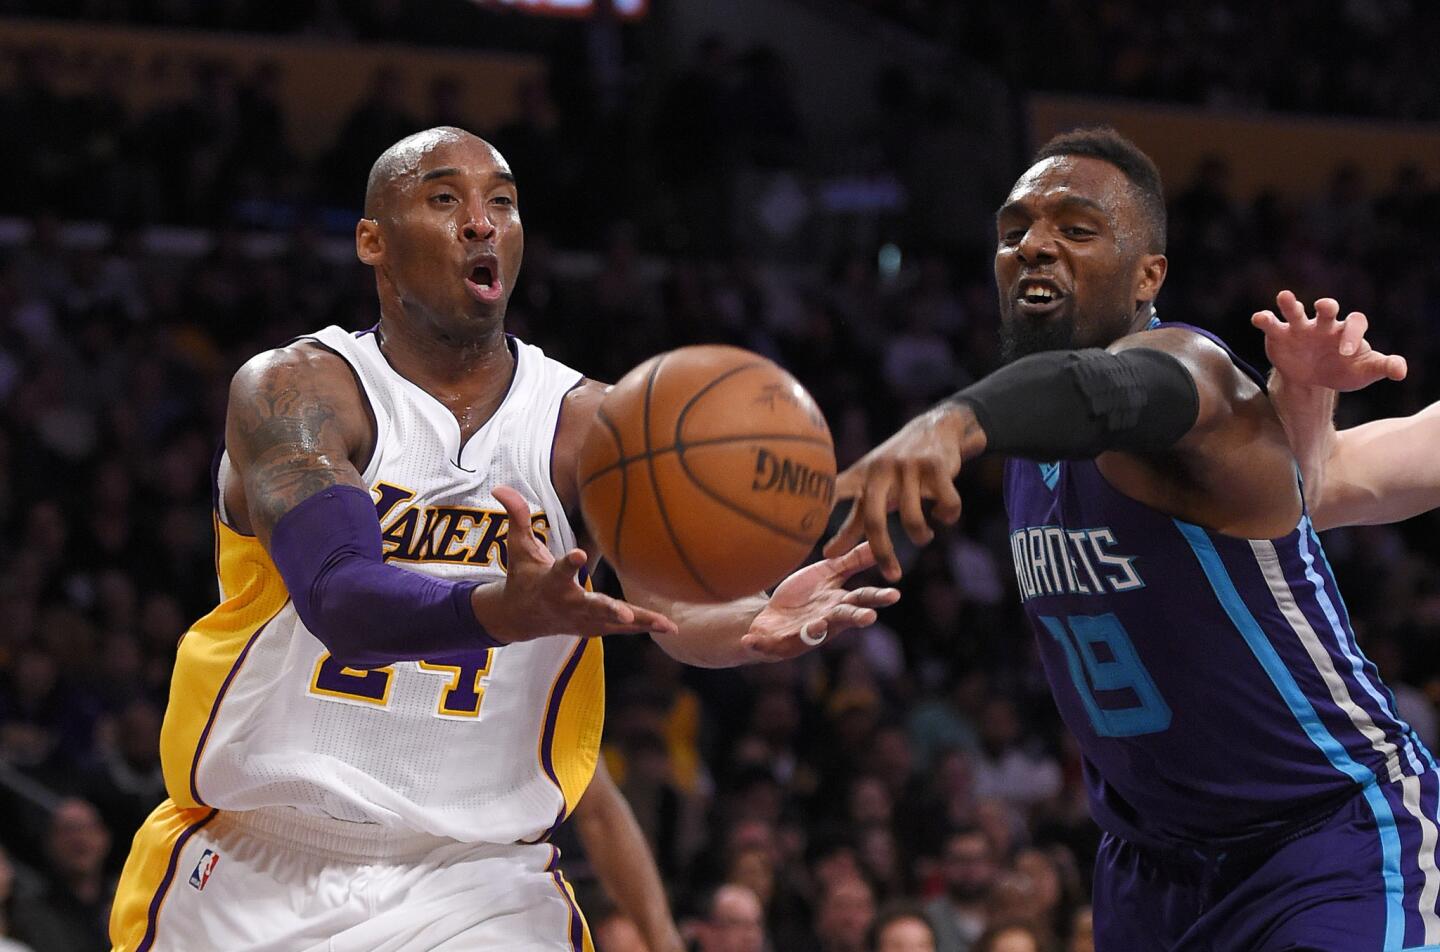 Lakers' losing streak extended to 10 games by Hornets